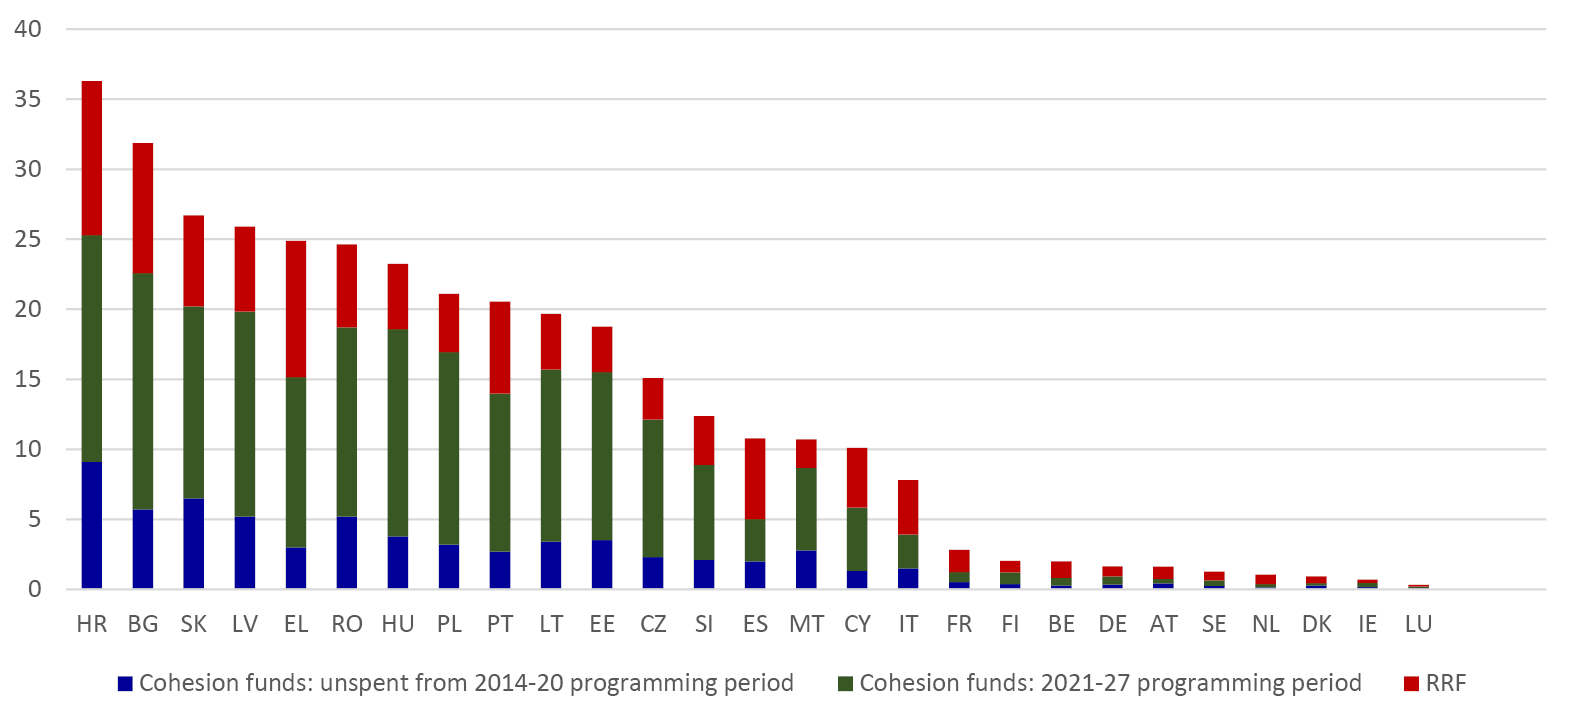 Bar graph illustrating for each EU country the component of public investment spending financed by the 2014-2020, 2021-2027 Cohesion Funds and the Recovery and Resilience Facility (RRF)